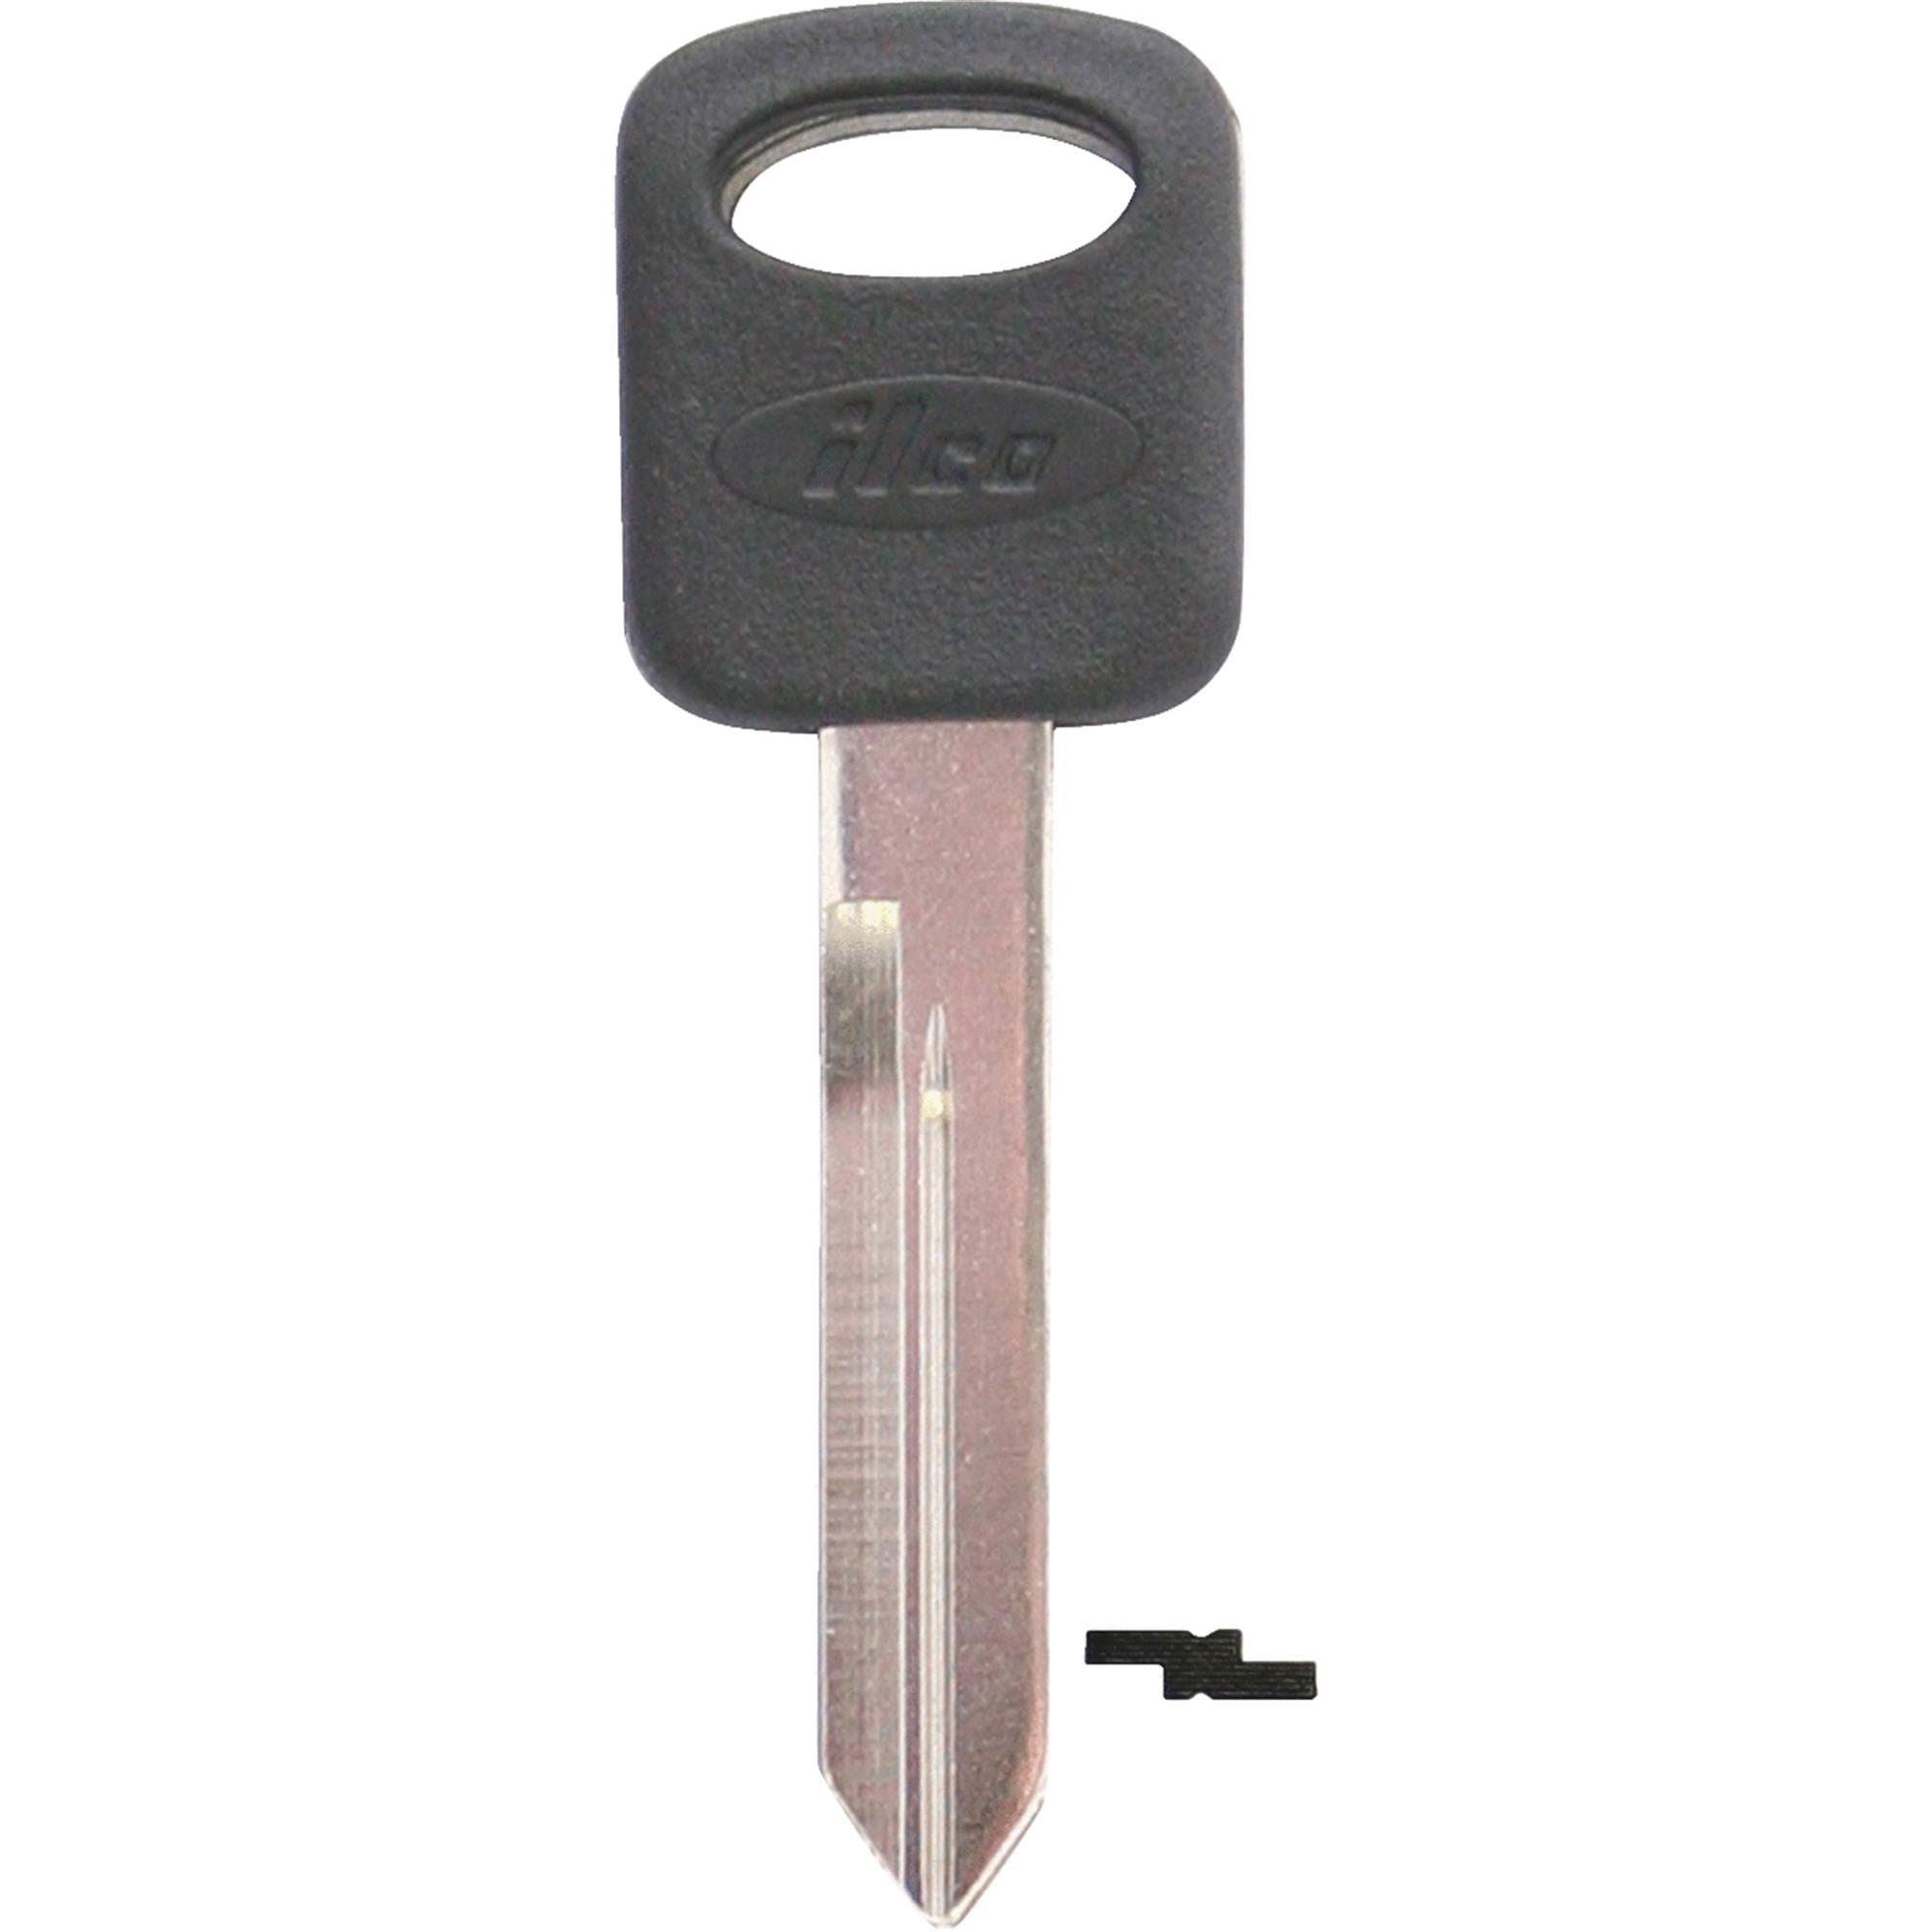 Kaba ILCO H75P Ford Plastic-cap Automotive Key - Nickel Plated, 5 Pack